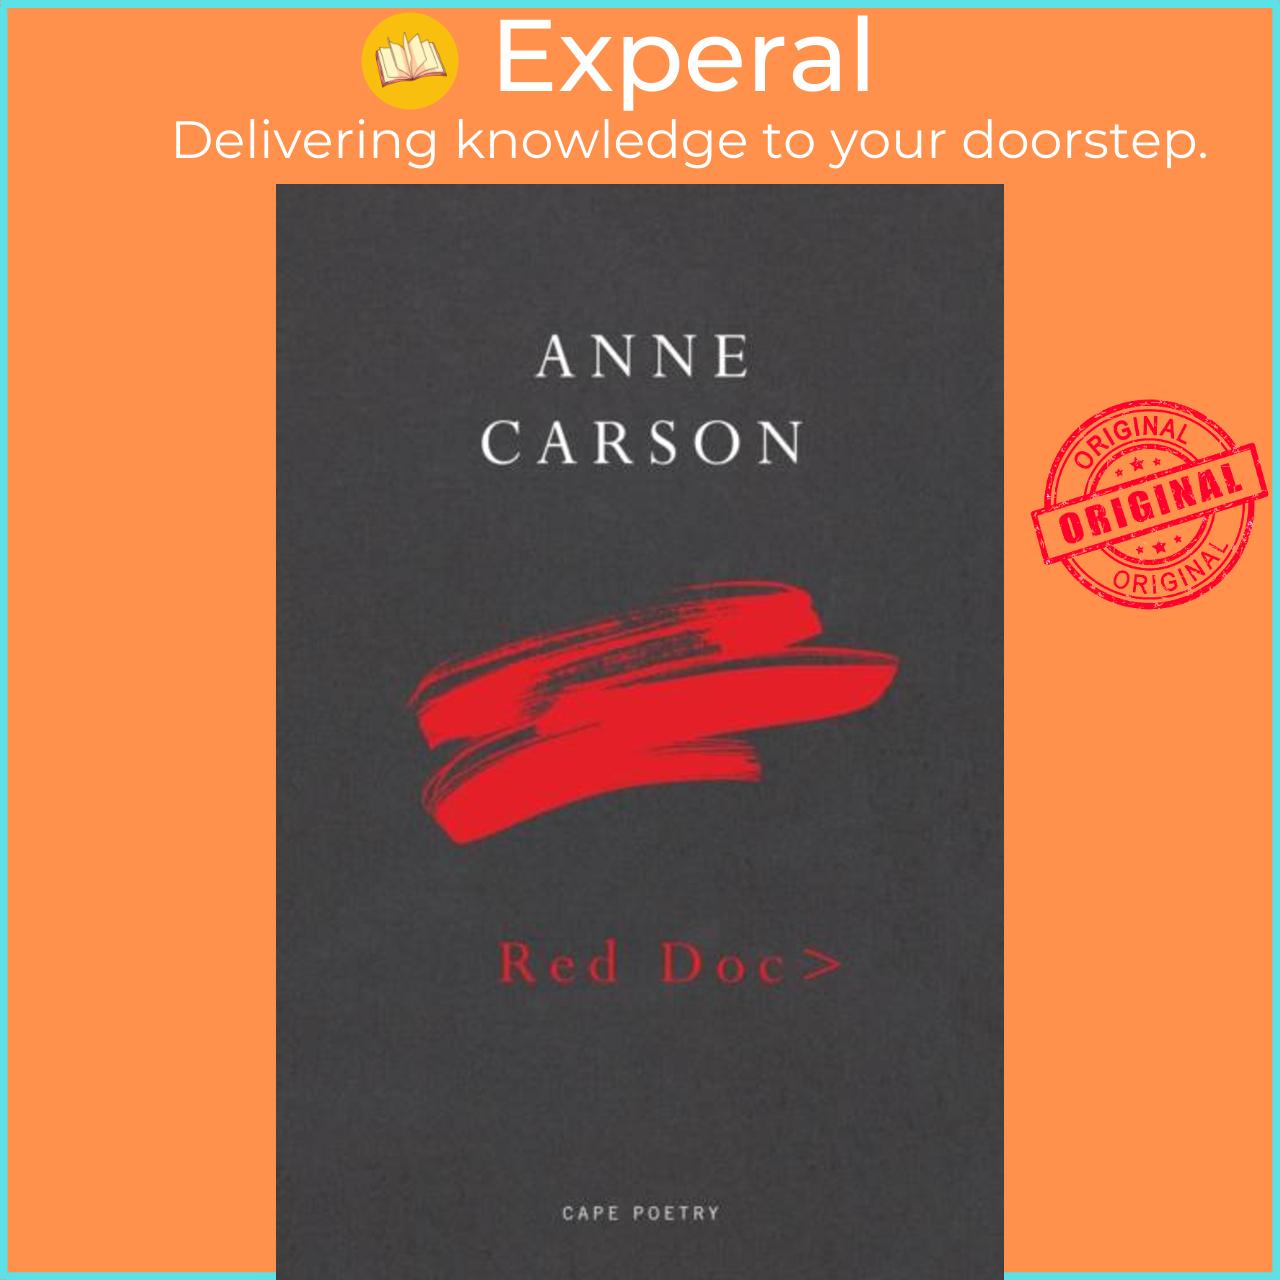 Sách - Red Doc> by Anne Carson (UK edition, paperback)